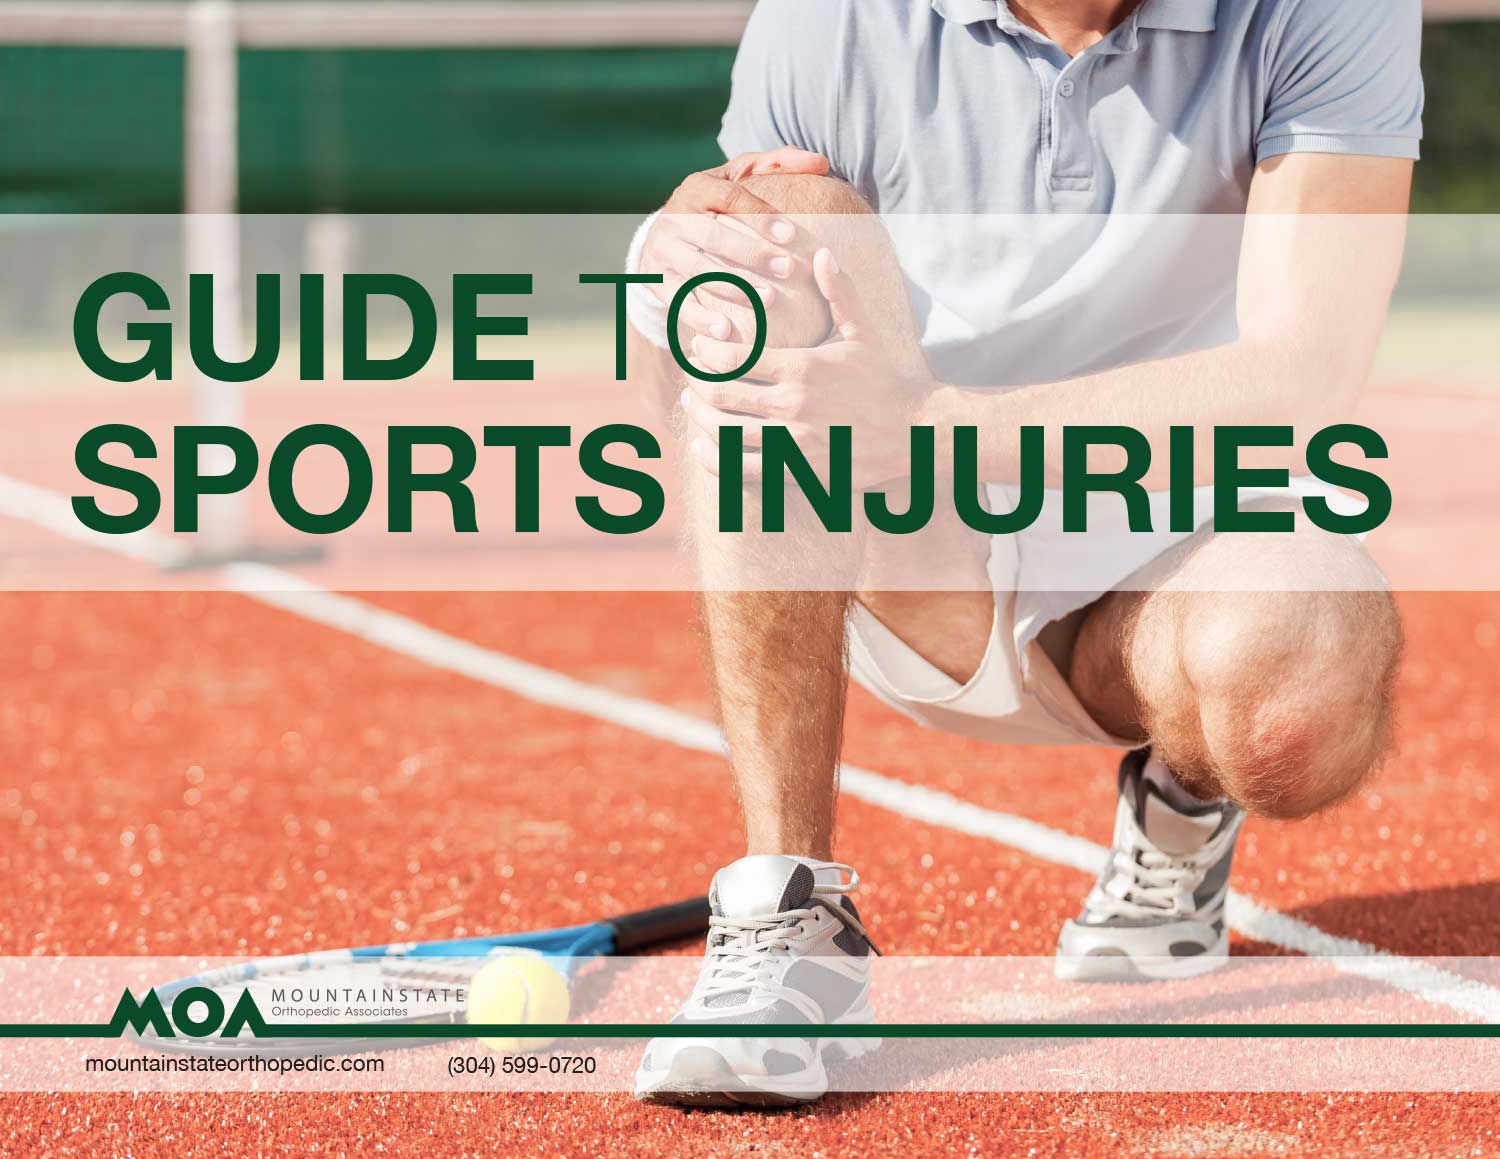 Guide to Sports Injuries